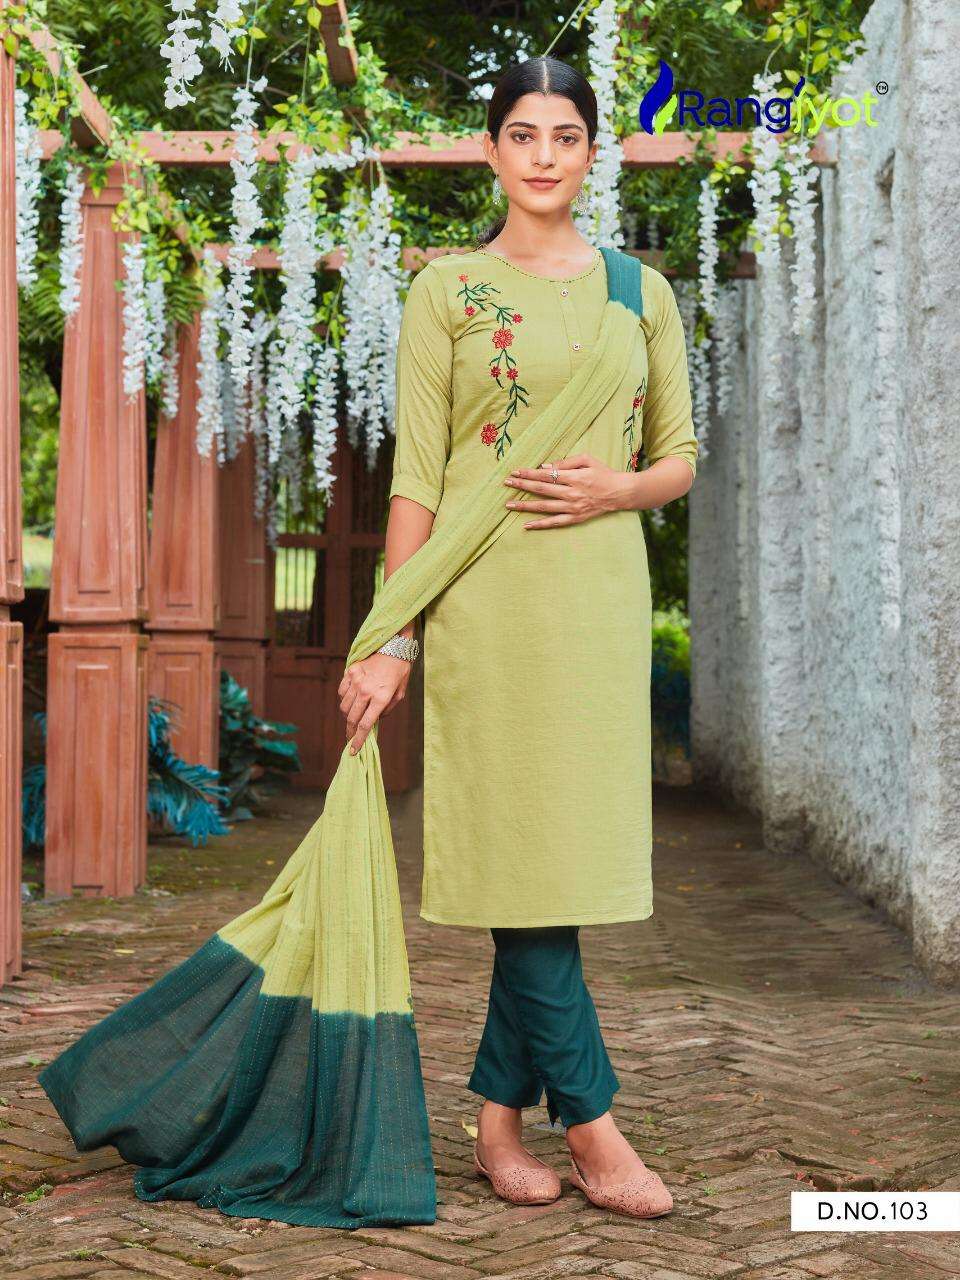 CHITRA VOL-1 BY RANGJYOT FASHION 101 TO 108 SERIES BEAUTIFUL SUITS COLORFUL STYLISH FANCY CASUAL WEAR & ETHNIC WEAR MASKA SILK DRESSES AT WHOLESALE PRICE